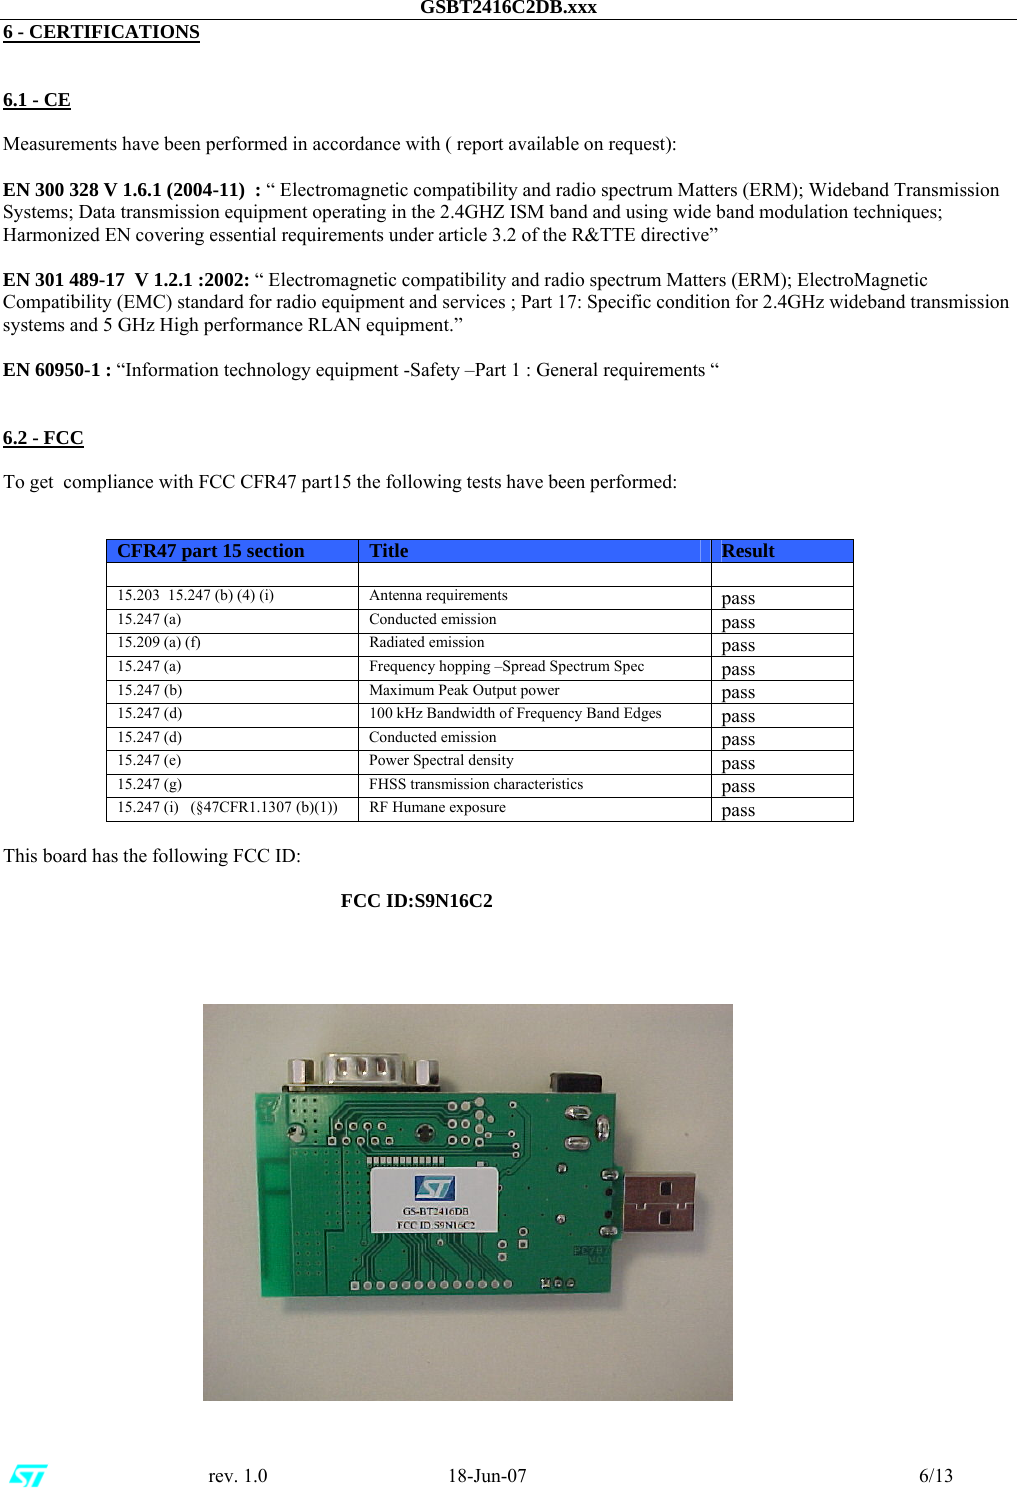 GSBT2416C2DB.xxx                                            rev. 1.0                           18-Jun-07                                                                                6/13 6 - CERTIFICATIONS   6.1 - CE  Measurements have been performed in accordance with ( report available on request):  EN 300 328 V 1.6.1 (2004-11)  : “ Electromagnetic compatibility and radio spectrum Matters (ERM); Wideband Transmission Systems; Data transmission equipment operating in the 2.4GHZ ISM band and using wide band modulation techniques; Harmonized EN covering essential requirements under article 3.2 of the R&amp;TTE directive”   EN 301 489-17  V 1.2.1 :2002: “ Electromagnetic compatibility and radio spectrum Matters (ERM); ElectroMagnetic Compatibility (EMC) standard for radio equipment and services ; Part 17: Specific condition for 2.4GHz wideband transmission systems and 5 GHz High performance RLAN equipment.”   EN 60950-1 : “Information technology equipment -Safety –Part 1 : General requirements “   6.2 - FCC  To get  compliance with FCC CFR47 part15 the following tests have been performed:   CFR47 part 15 section  Title   Result     15.203  15.247 (b) (4) (i)  Antenna requirements  pass 15.247 (a)  Conducted emission   pass 15.209 (a) (f)  Radiated emission  pass 15.247 (a)  Frequency hopping –Spread Spectrum Spec  pass 15.247 (b)  Maximum Peak Output power  pass 15.247 (d)  100 kHz Bandwidth of Frequency Band Edges  pass 15.247 (d)   Conducted emission  pass 15.247 (e)  Power Spectral density  pass 15.247 (g)  FHSS transmission characteristics  pass 15.247 (i)   (§47CFR1.1307 (b)(1))  RF Humane exposure  pass  This board has the following FCC ID:                                                                         FCC ID:S9N16C2                         